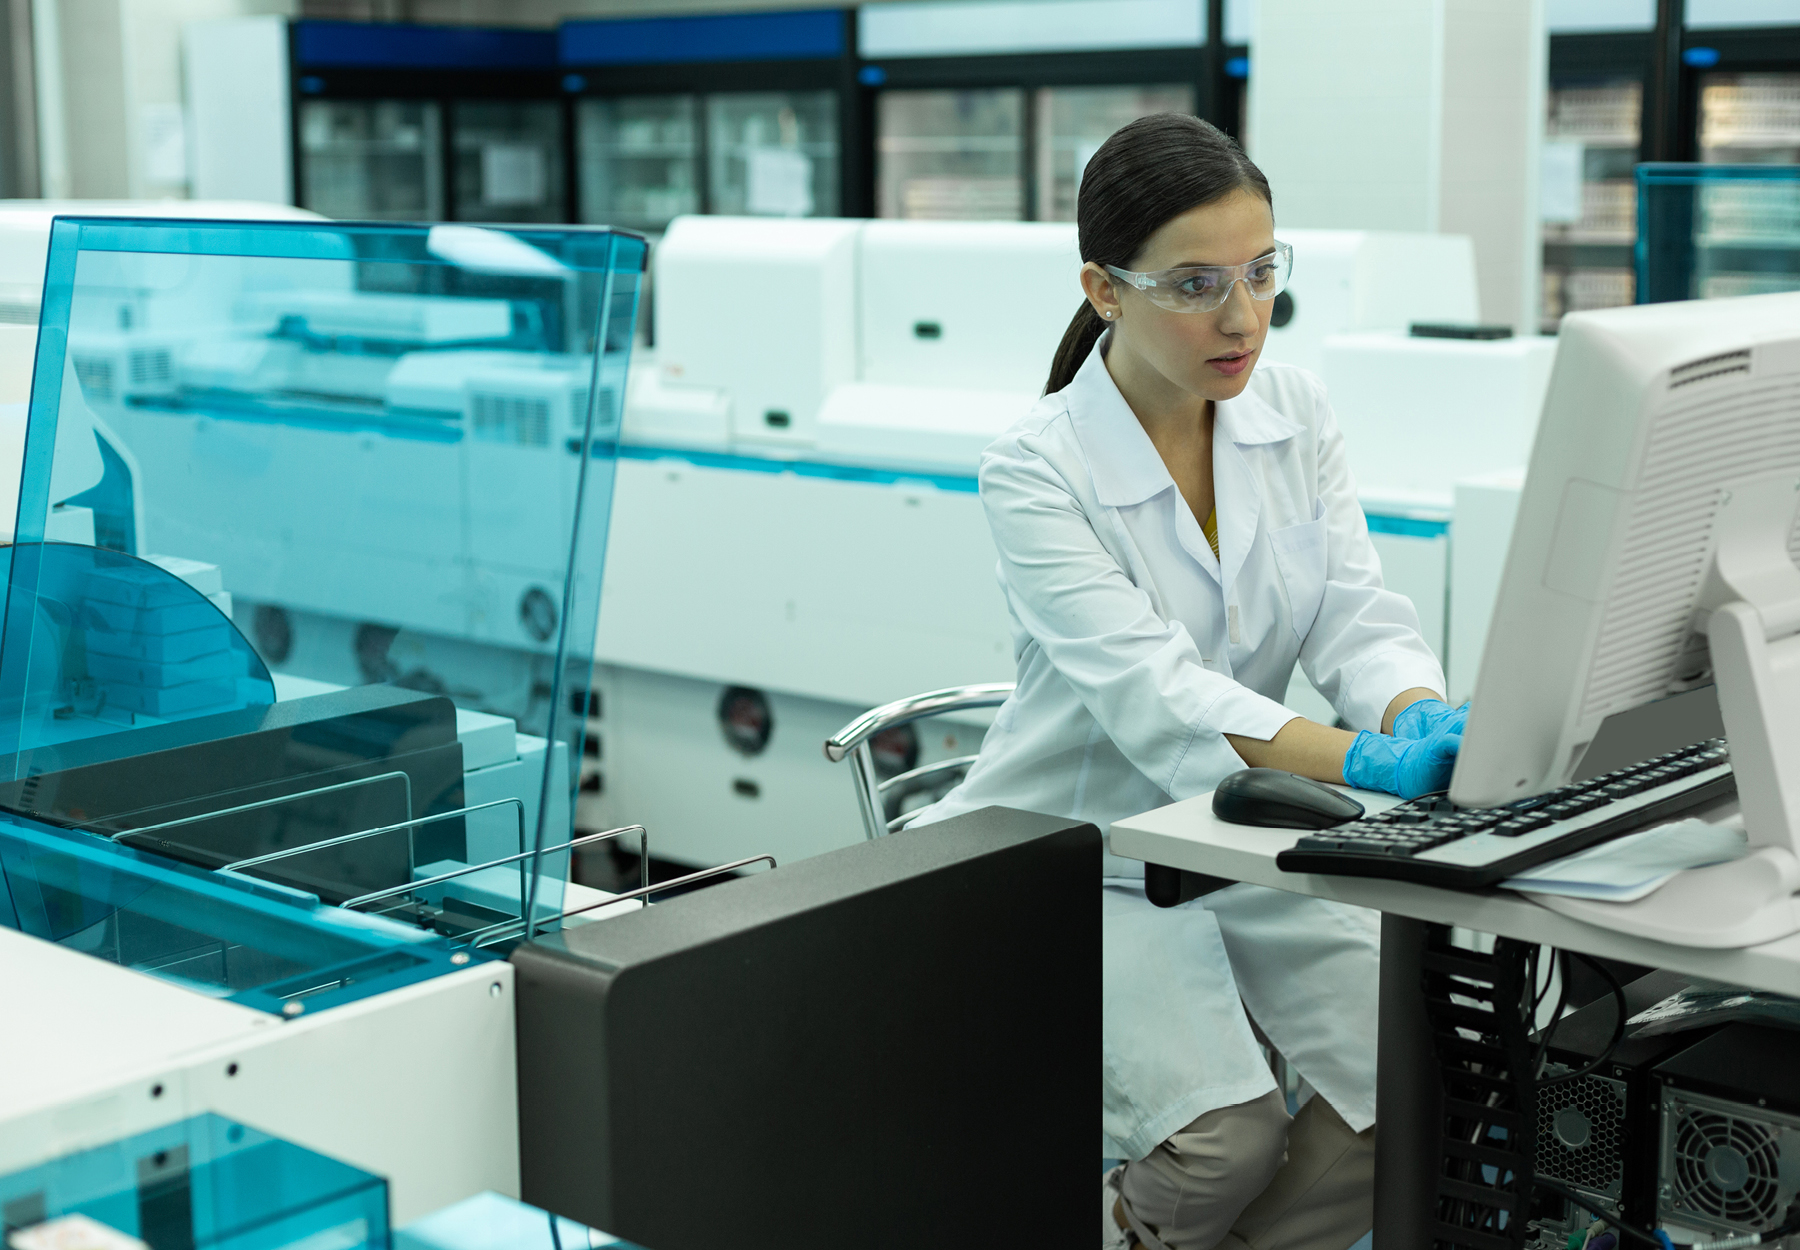 Female laboratory professional works on the computer in the lab. She has a worried look on her face. Stock image.